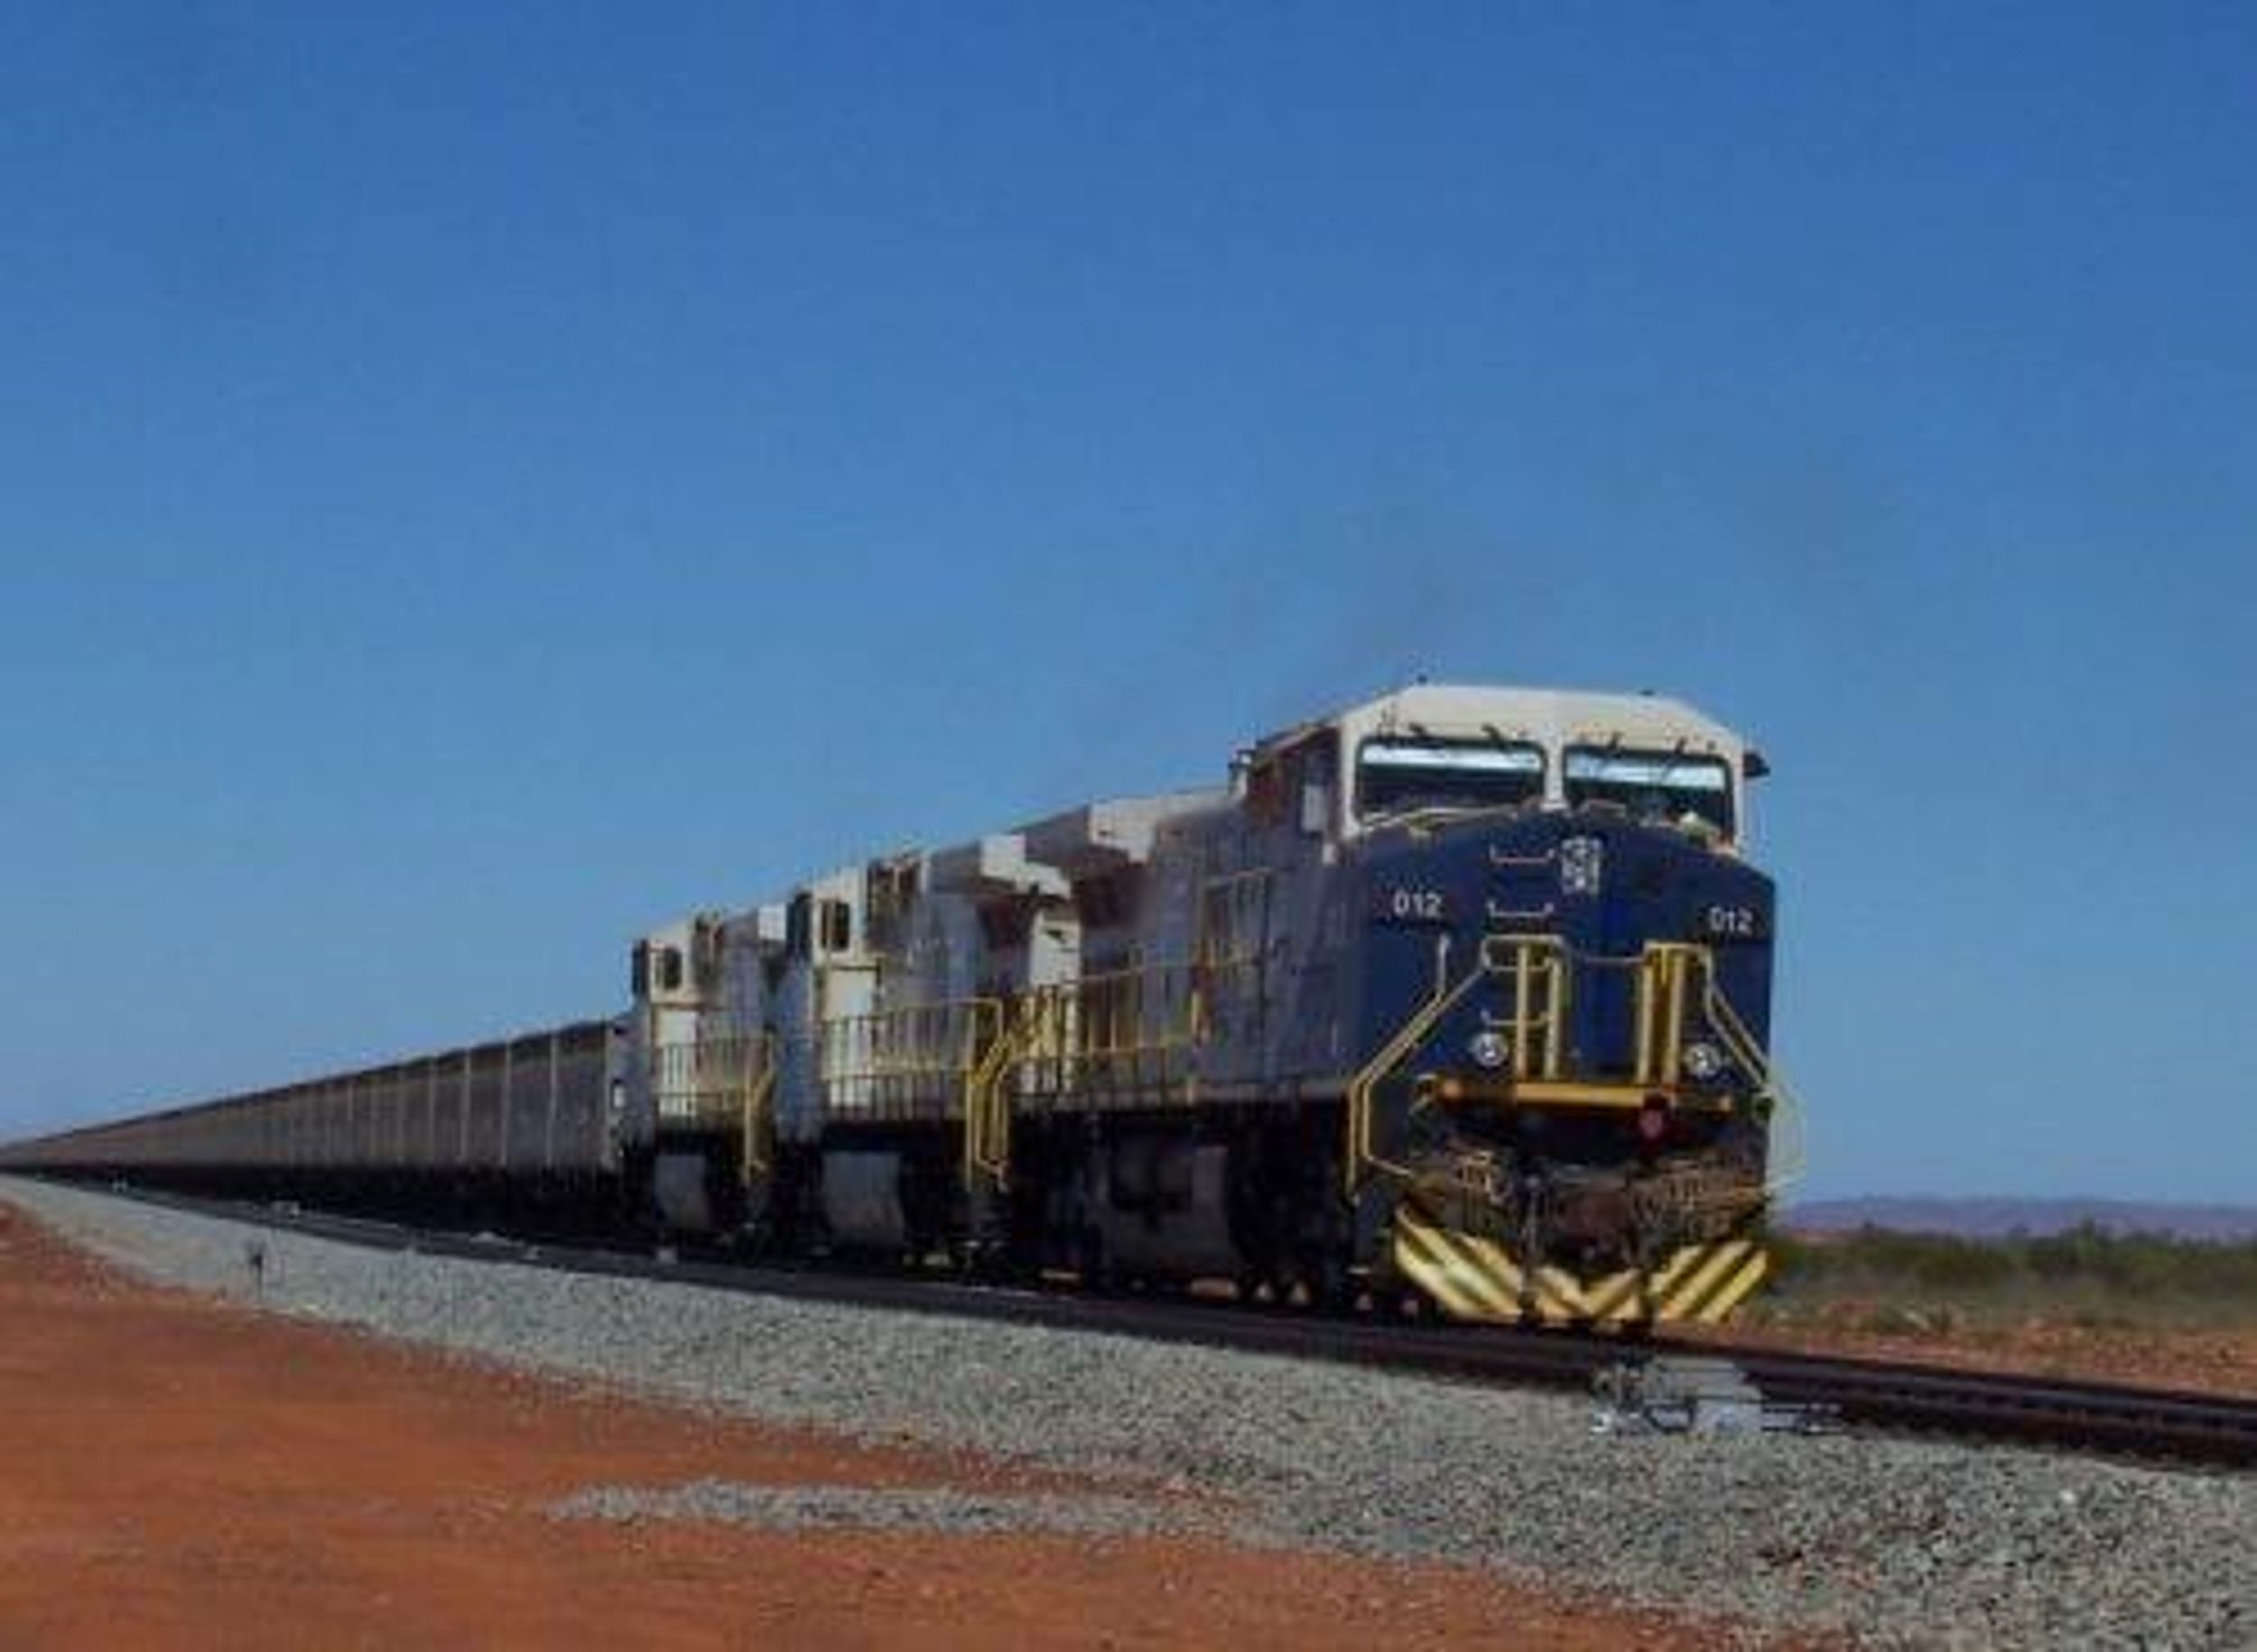 The Good Times Roll on for Fortescue Metals